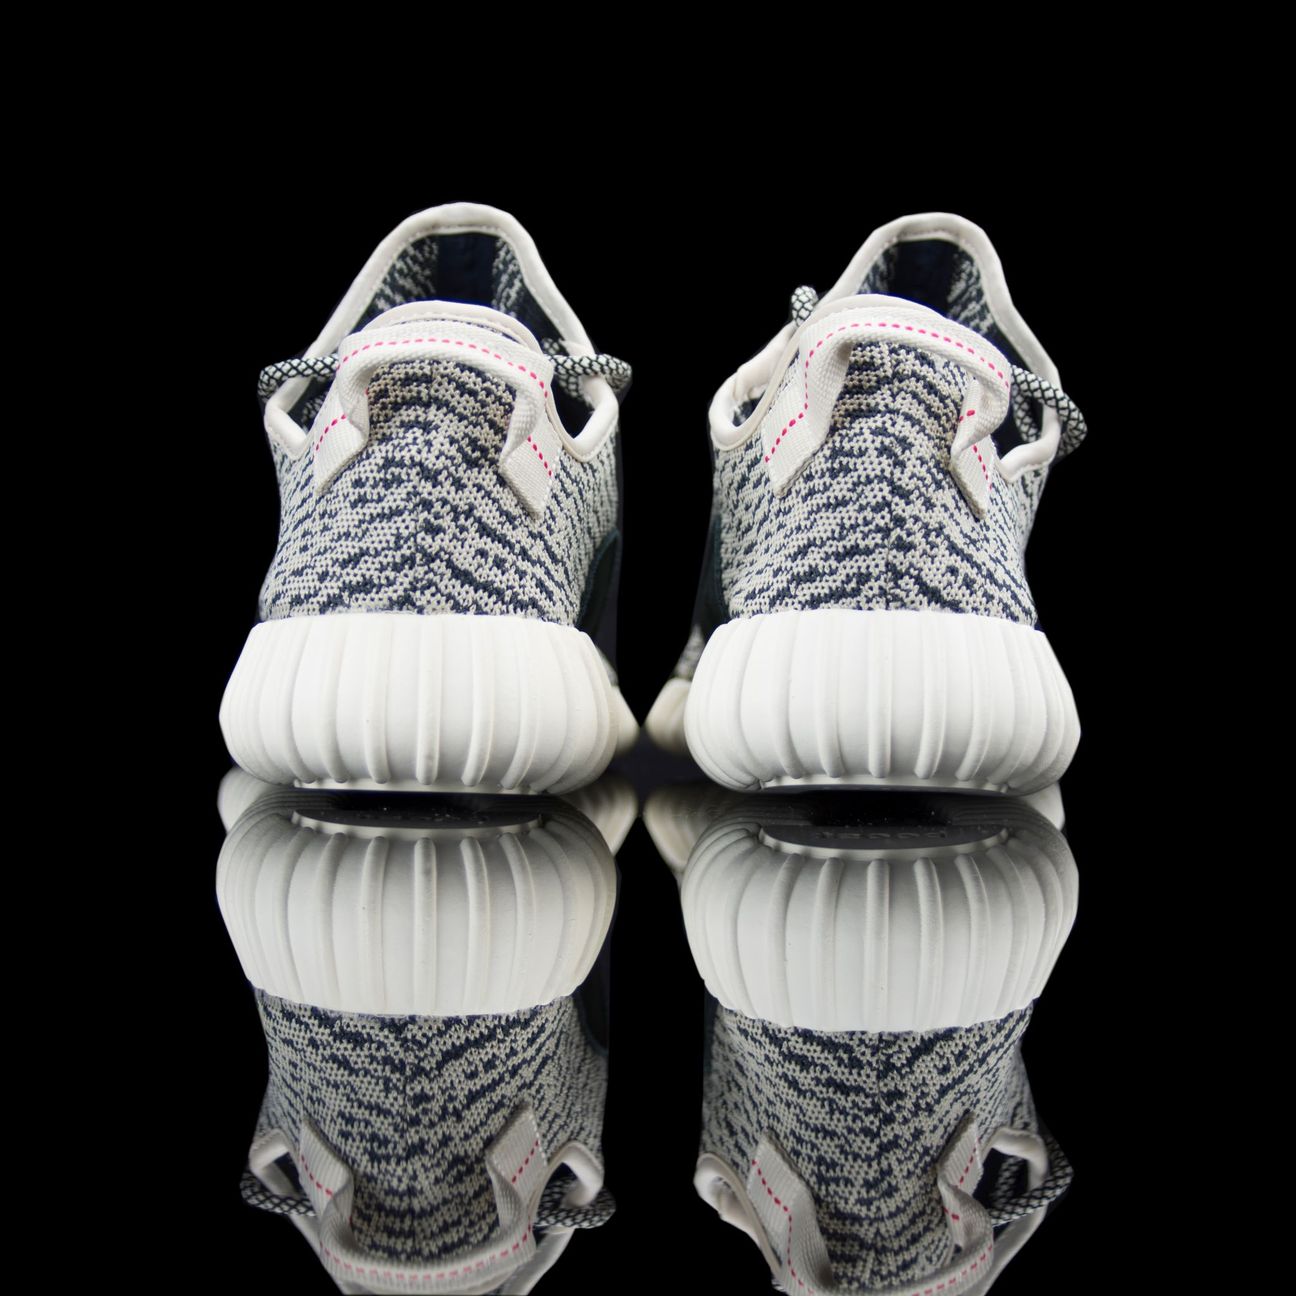 Adidas-Yeezy Boost 350-Product code: AQ4832 Colour: Turtledove/Blue Grey-White Year of release: 2015-fabriqe.com